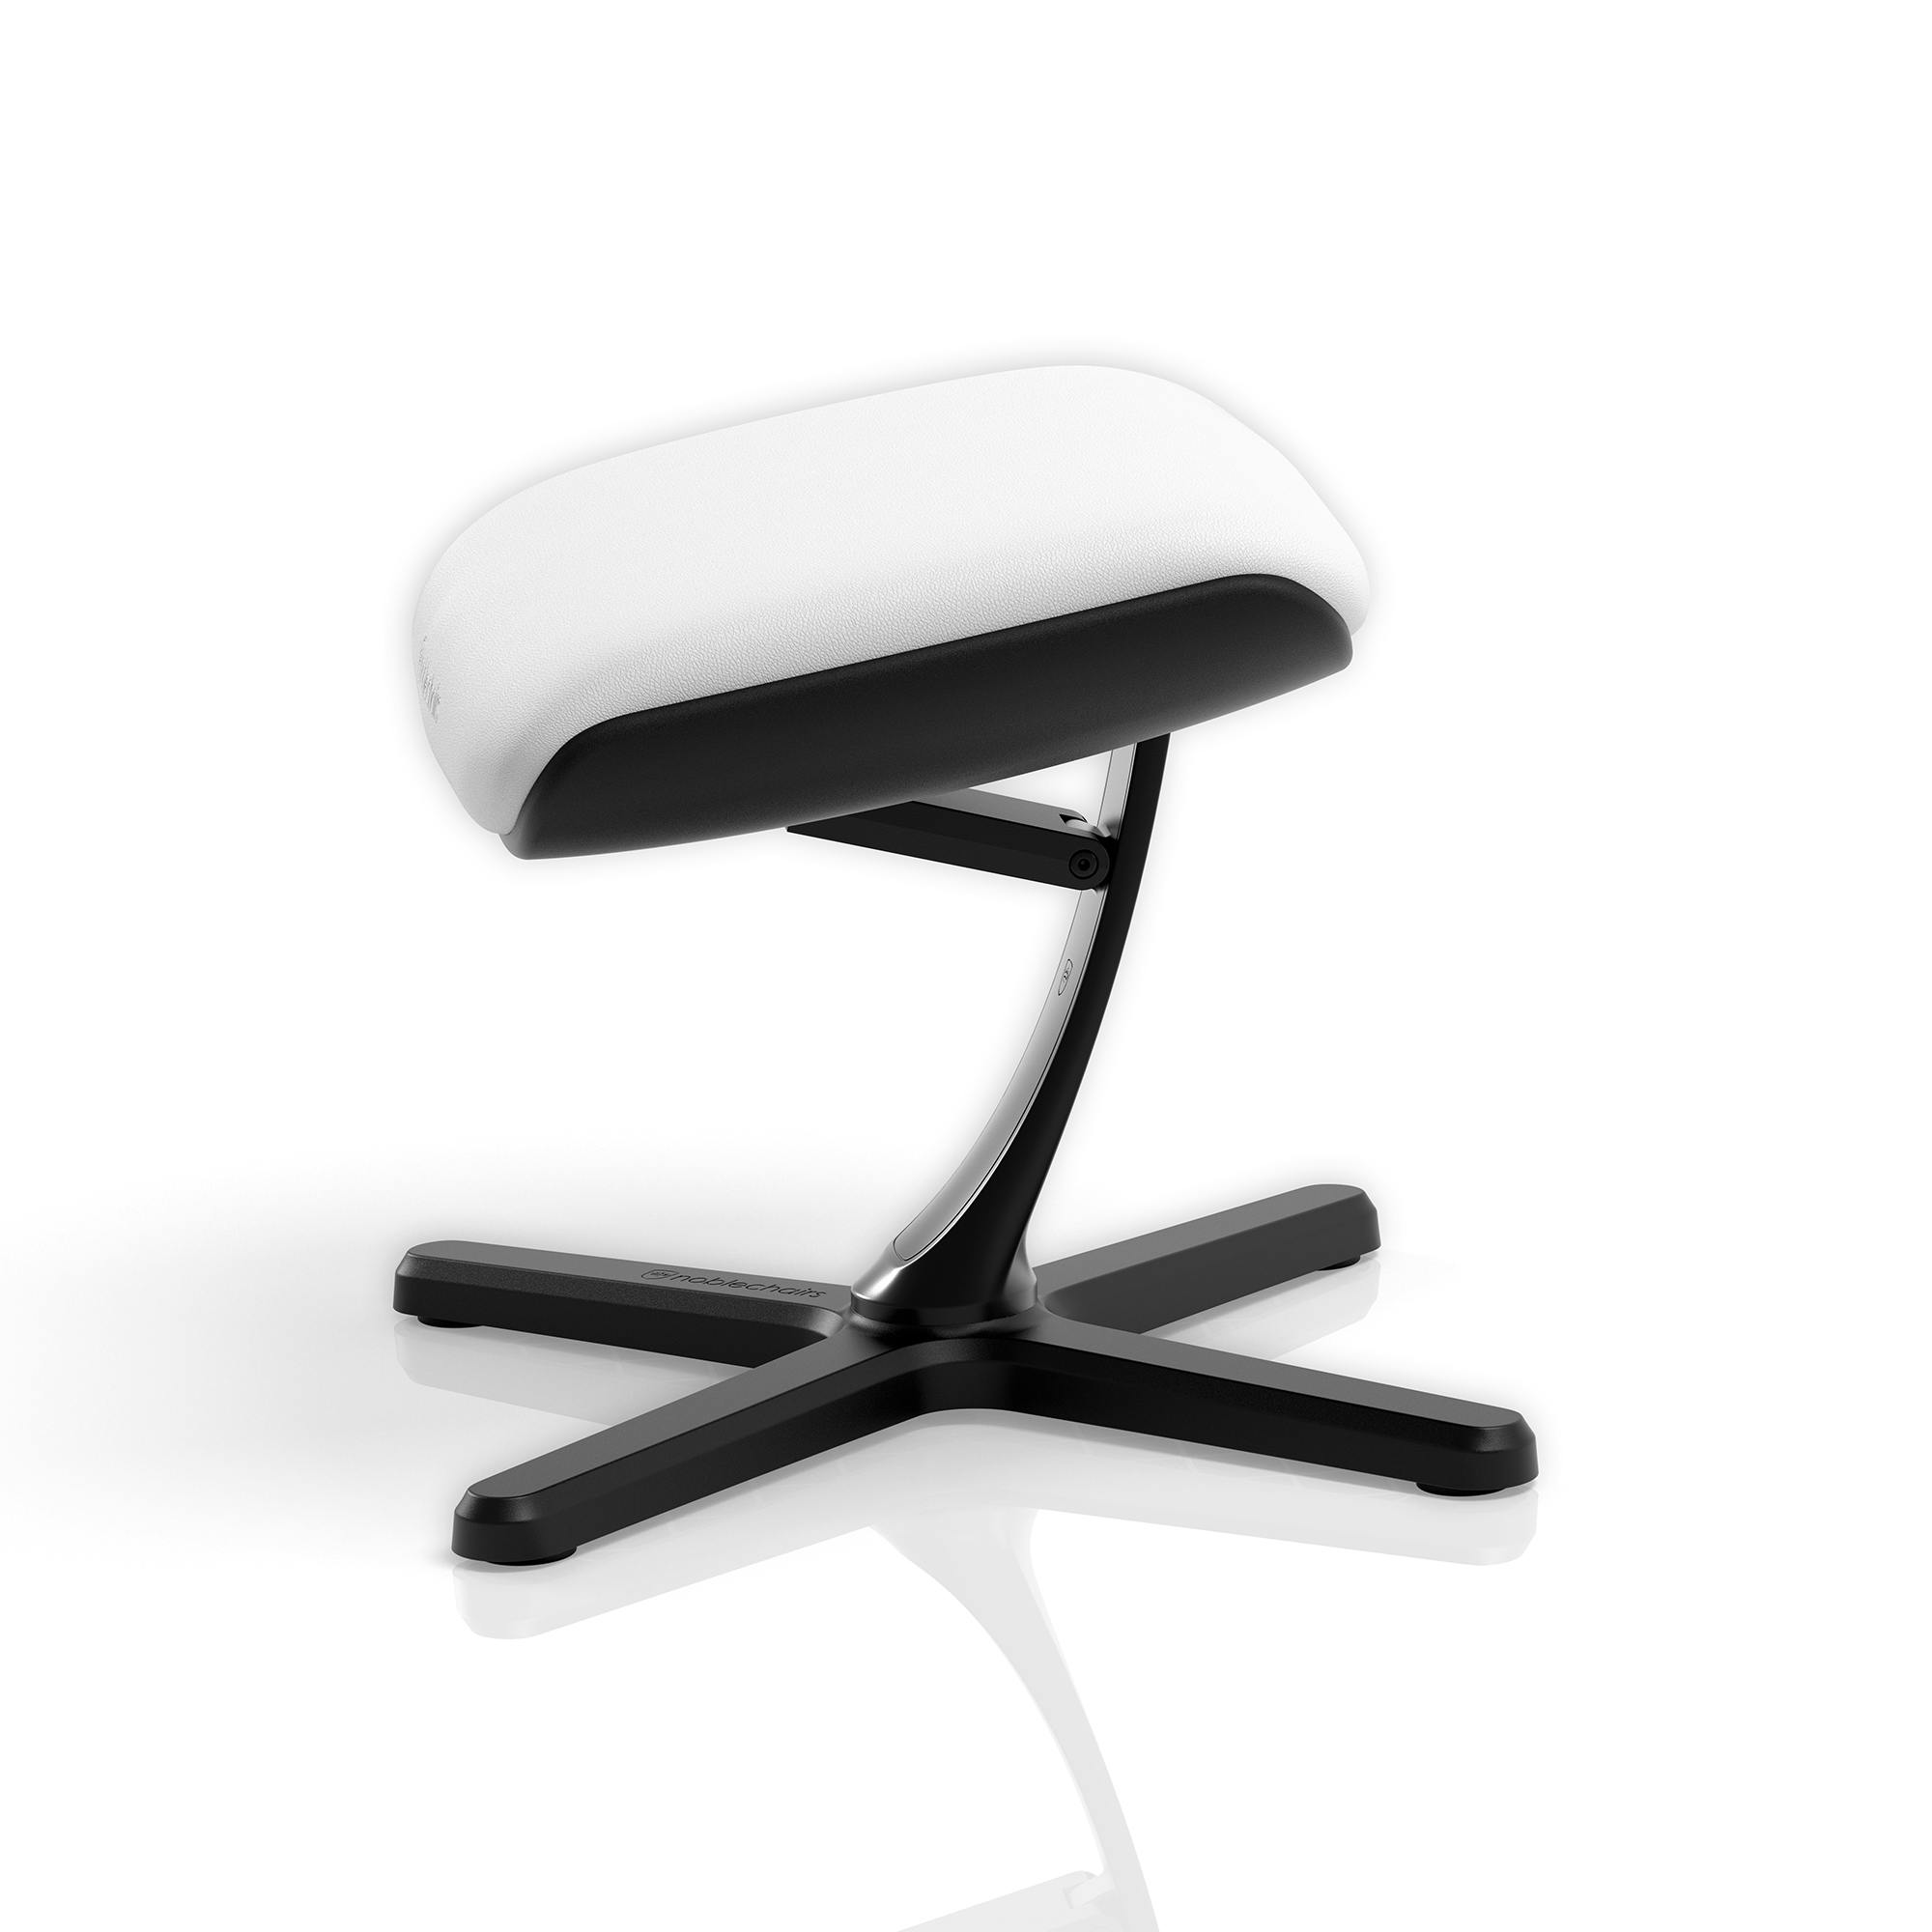 noblechairs - Footrest 2 - White Edition